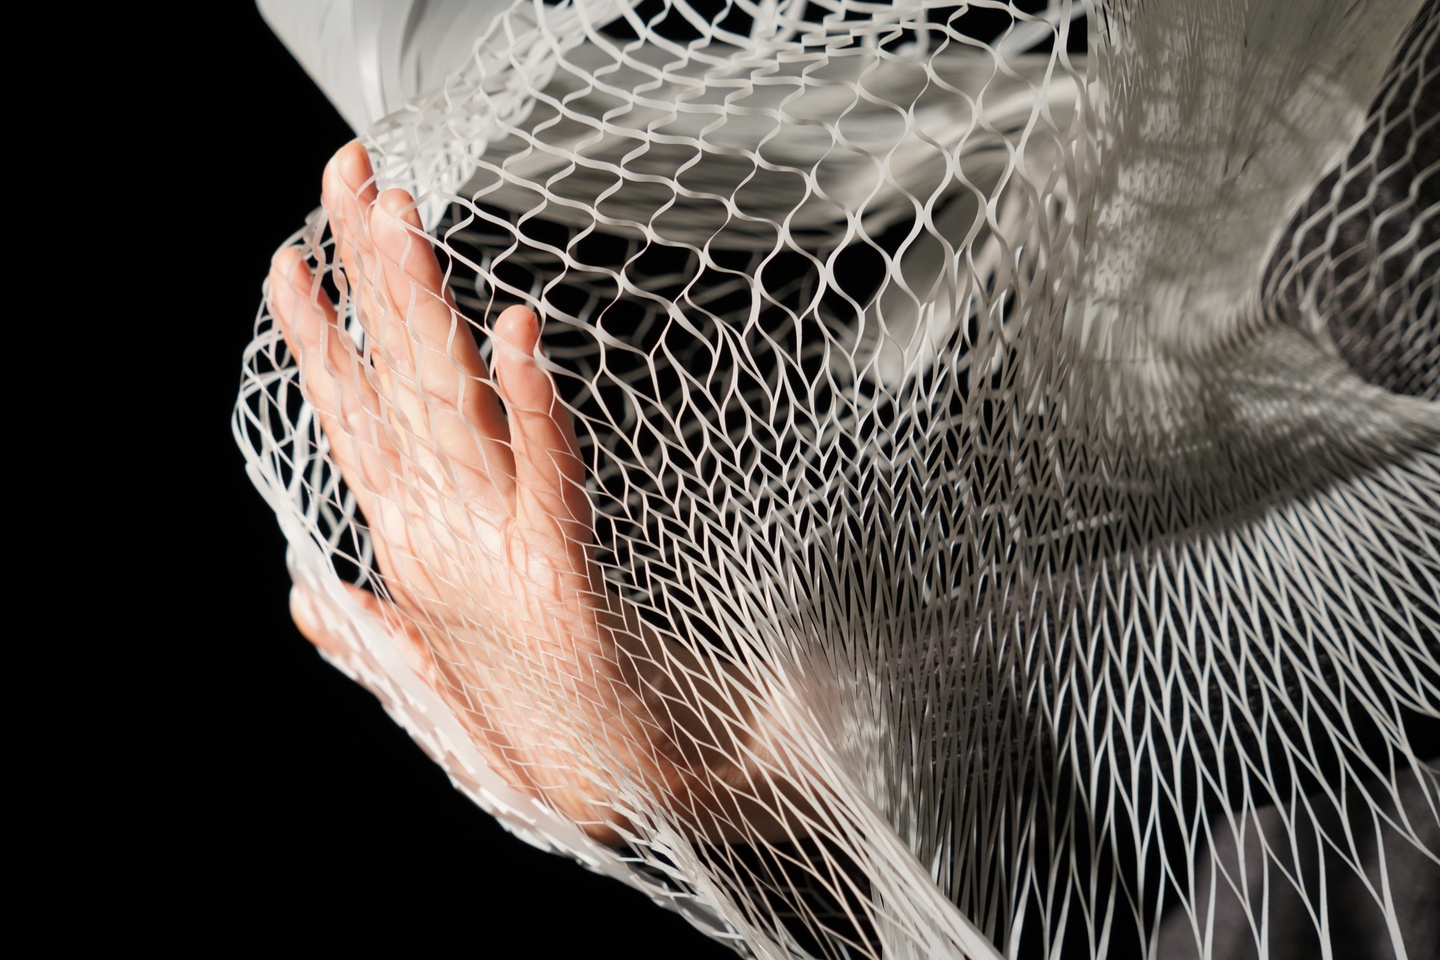 A hand presses against a white 3D printed mesh and expands it outward.